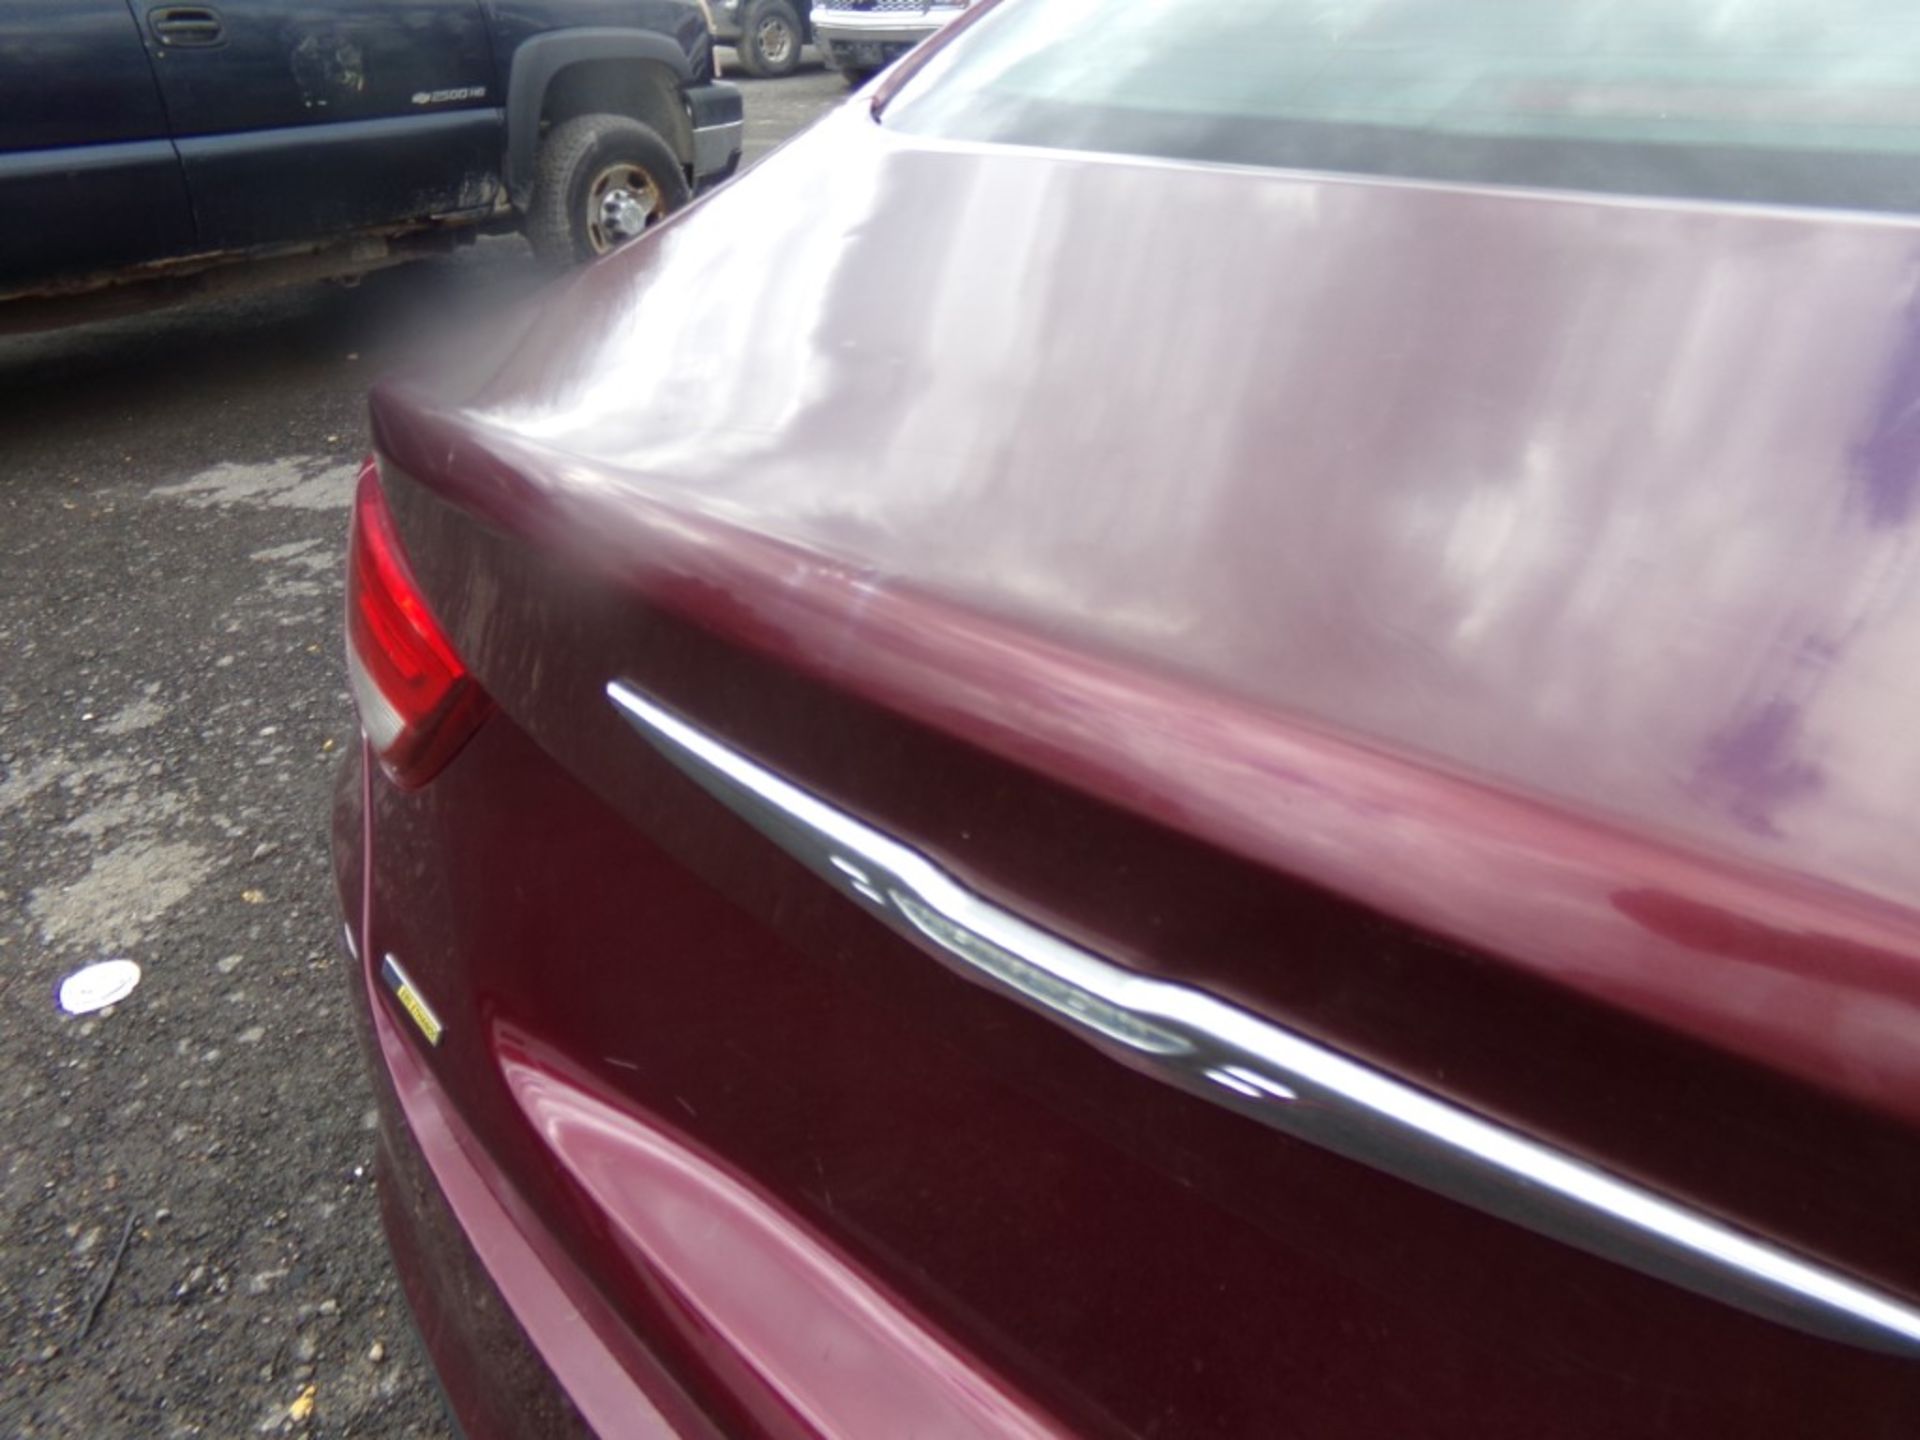 2015 Chrysler 200 Limited, Maroon, 137,543 Miles, VIN# 1C3CCCAB0FN591551, FRONT BUMPER COVER HAS - Image 6 of 8